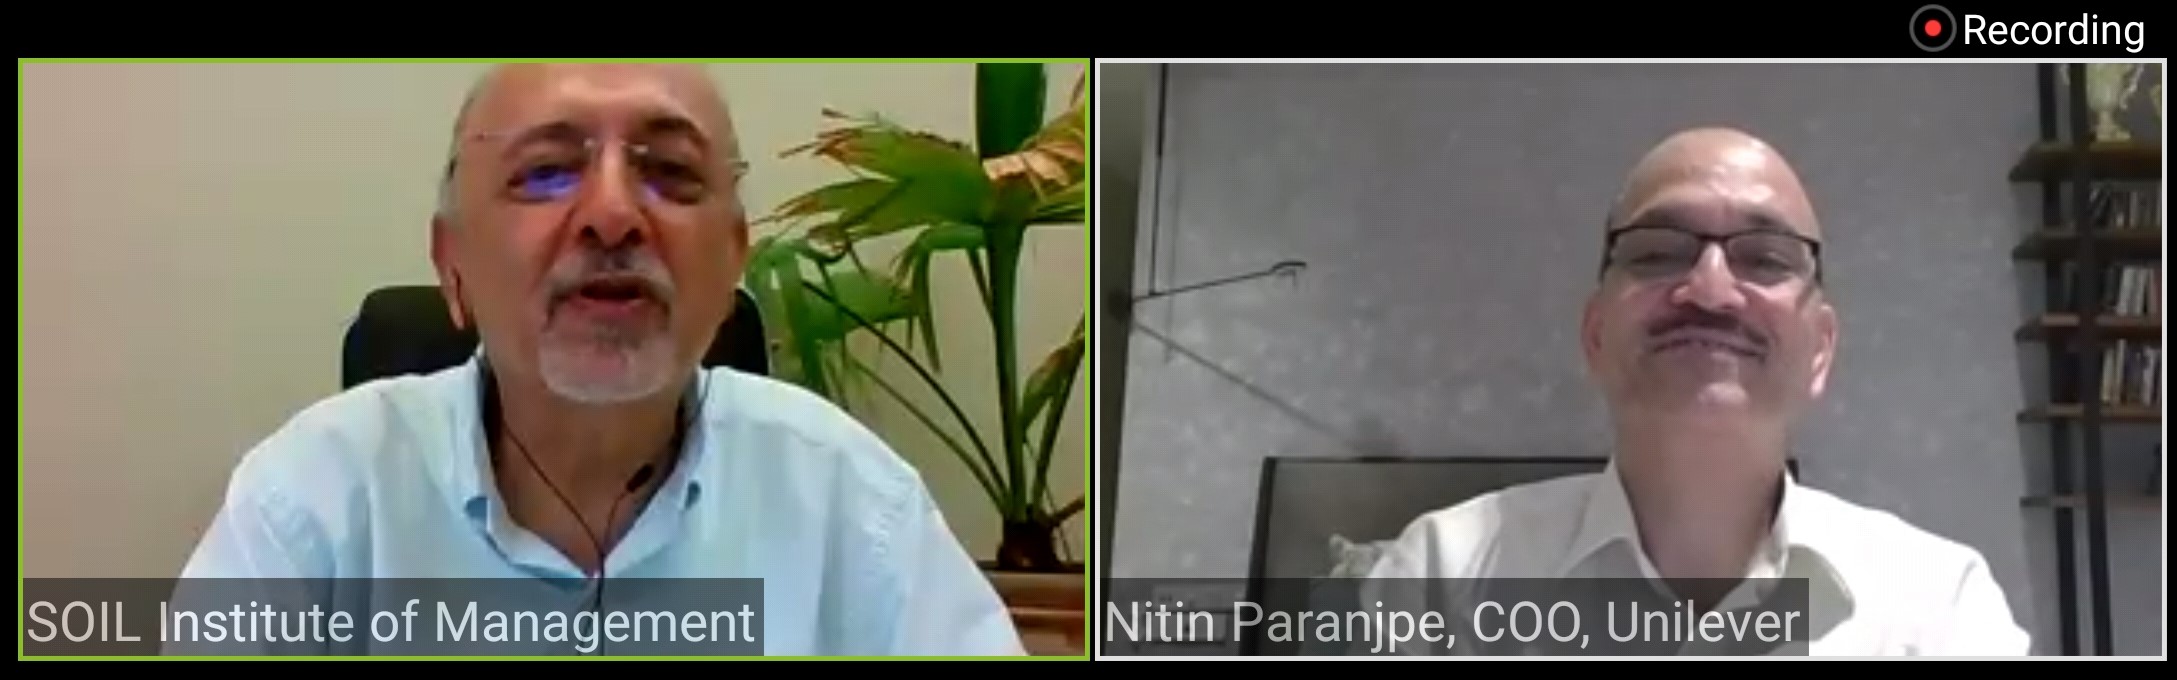 Becoming the best version of yourself with Nitin Paranjpe, COO, Unilever